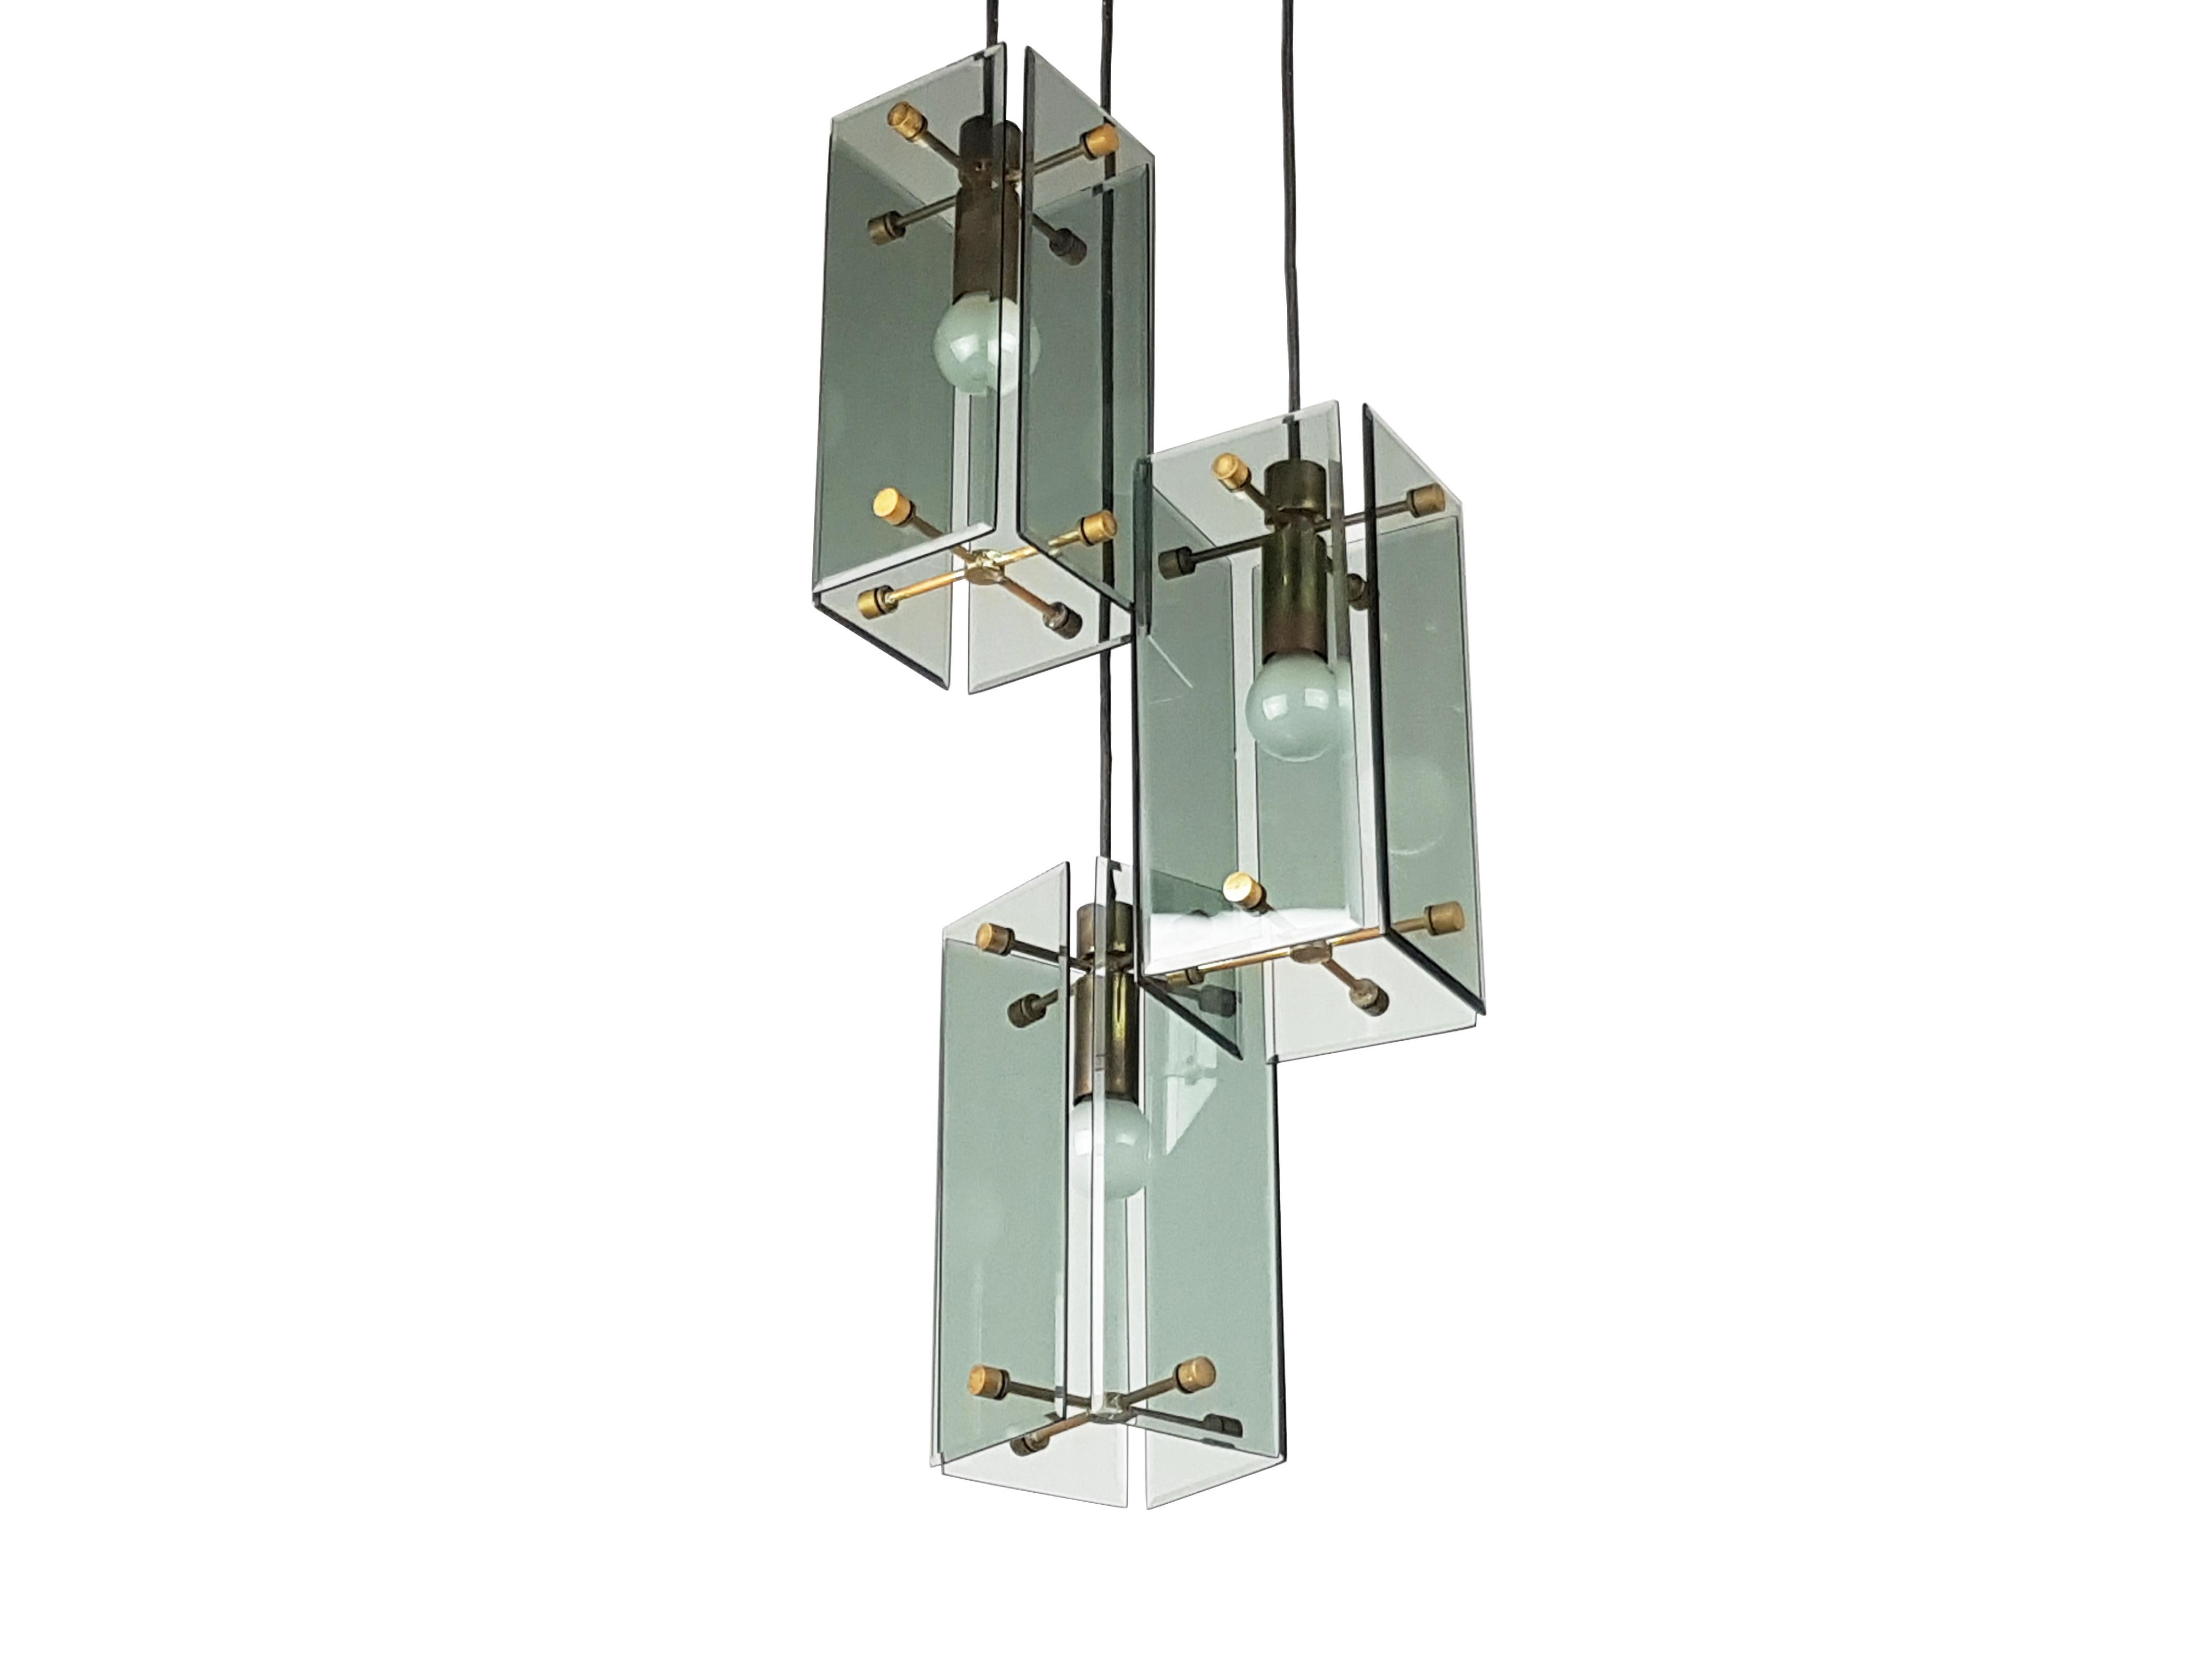 This elegant lamp was produced in Italy around the 1960s. It is composed by 3-lights pendants at different adjustable heights. Each element is made from a brass structure with 4 smoked glass shades. A wooden and golden metal ceiling supports